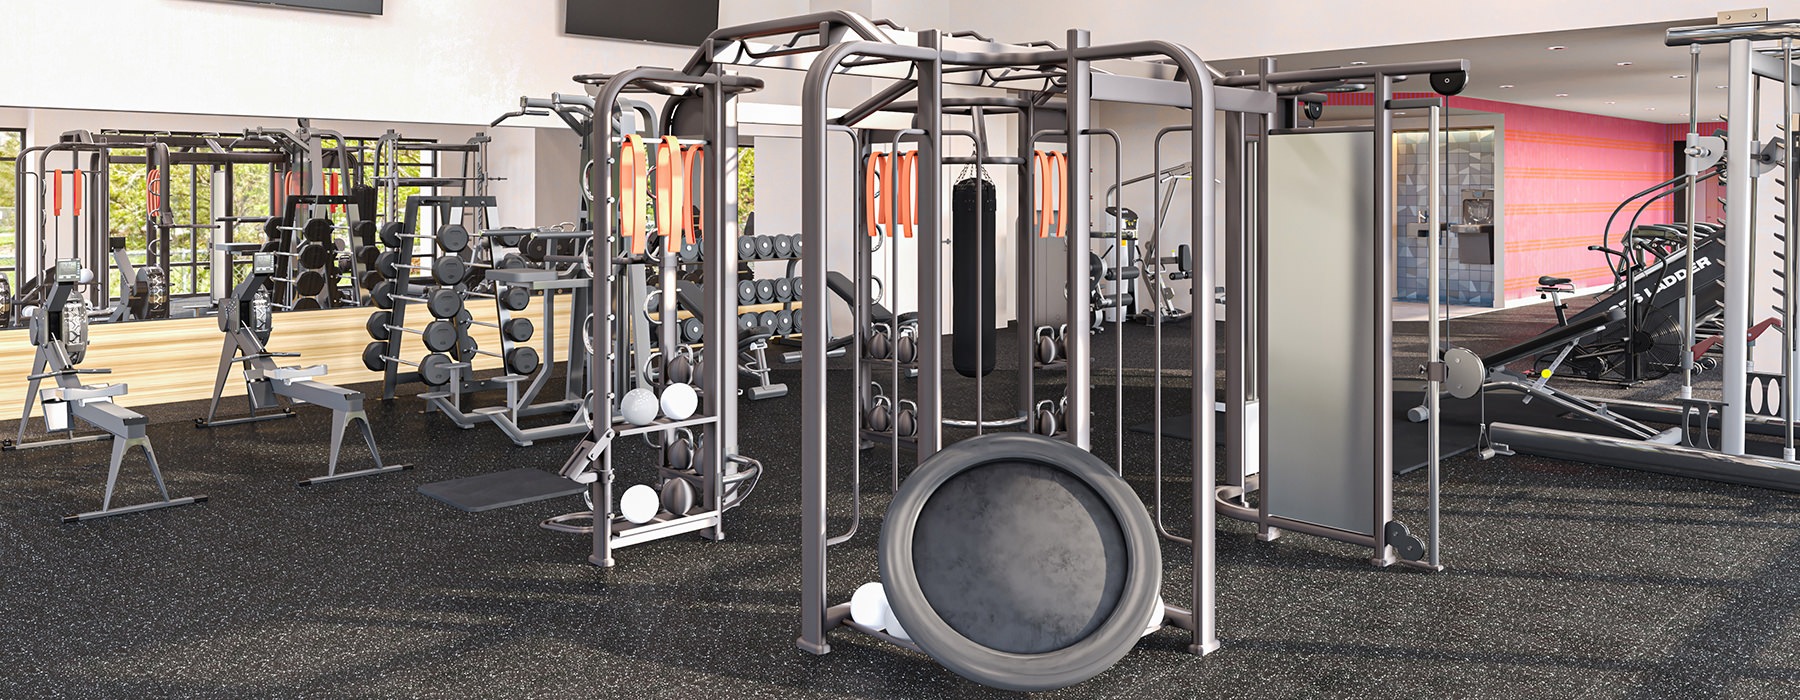 Large well lit fitness center with ample equipment and large windows 